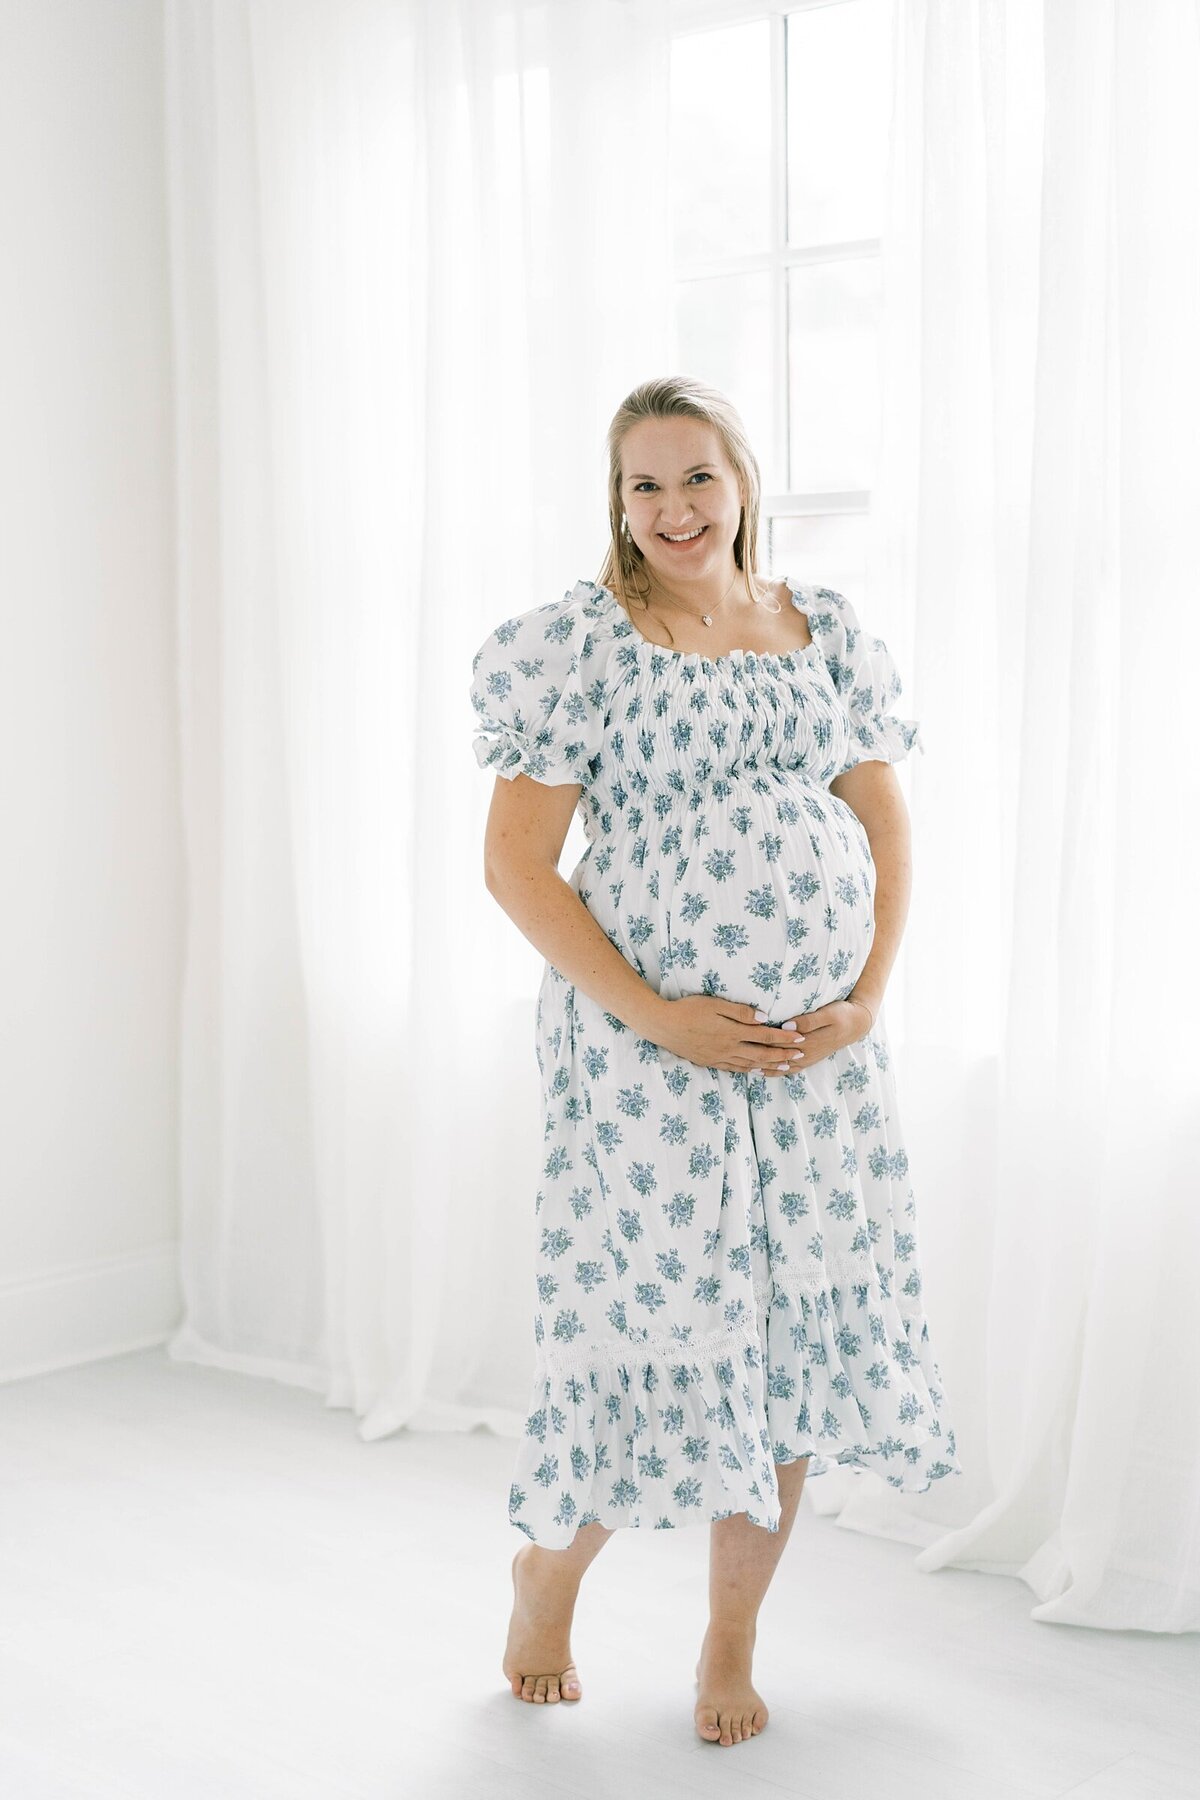 Roswell Maternity Photographer_0083